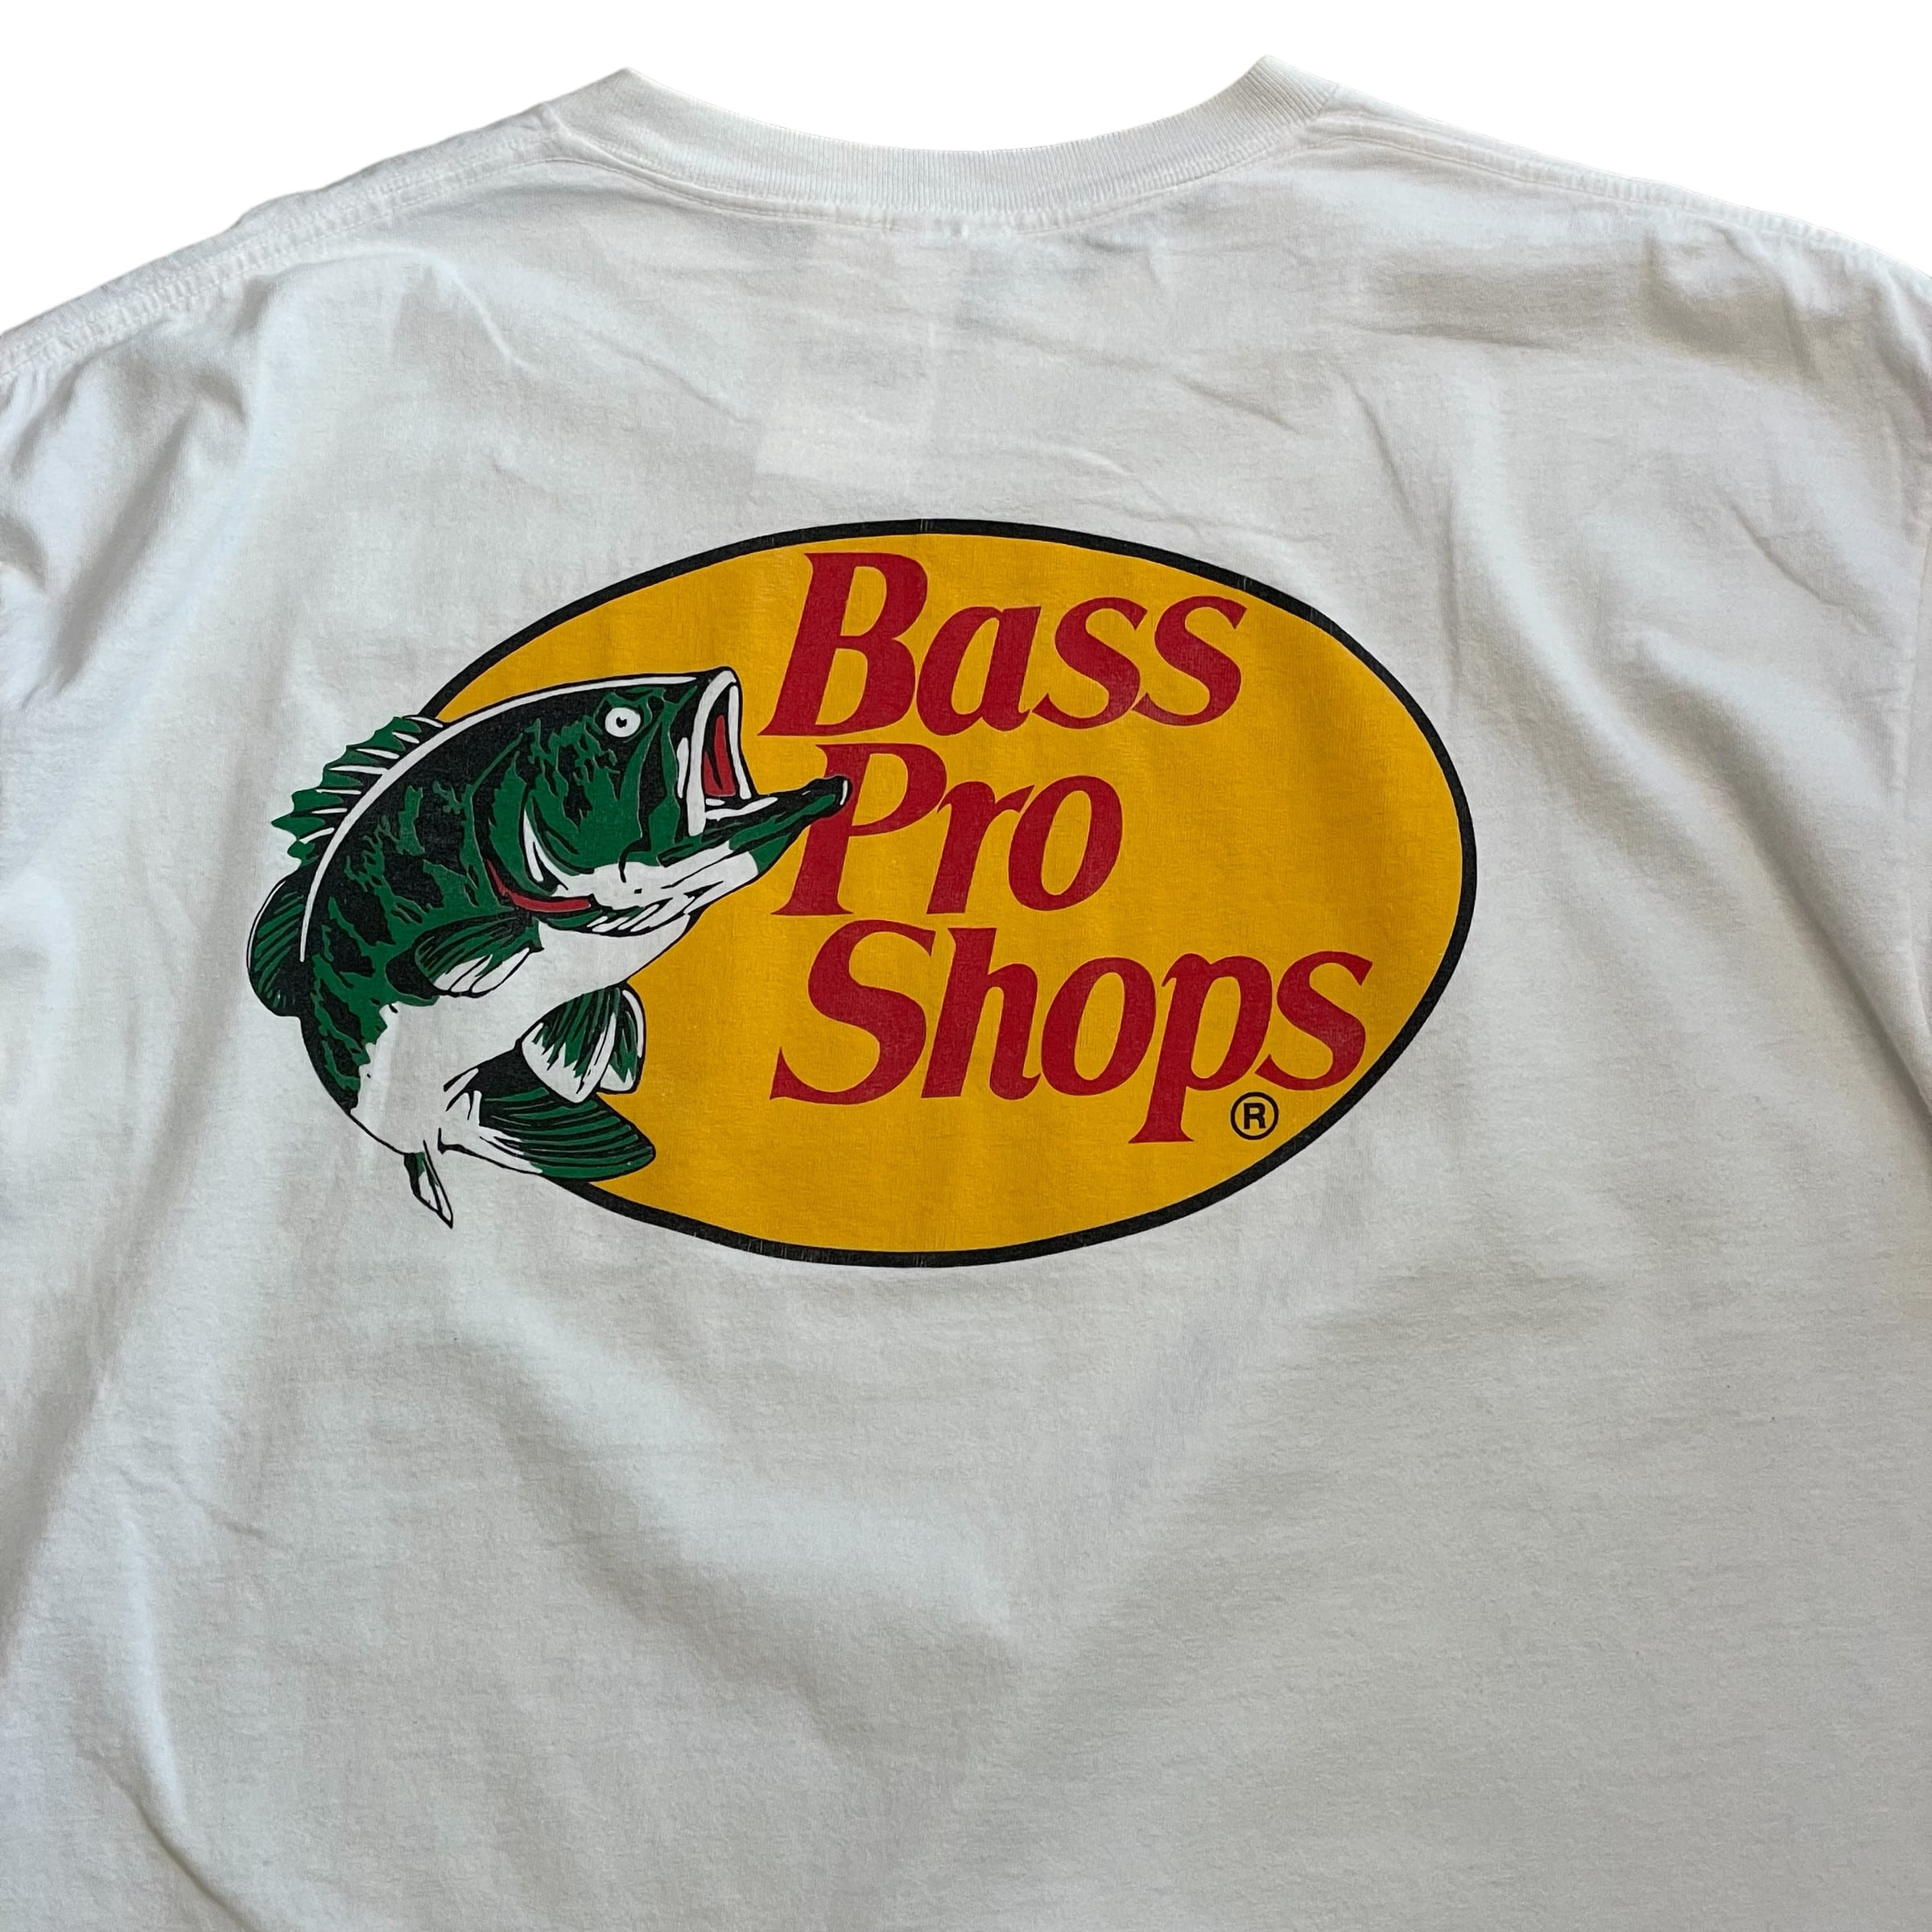 90s Bass Pro Shops logo T-shirt | What’z up powered by BASE